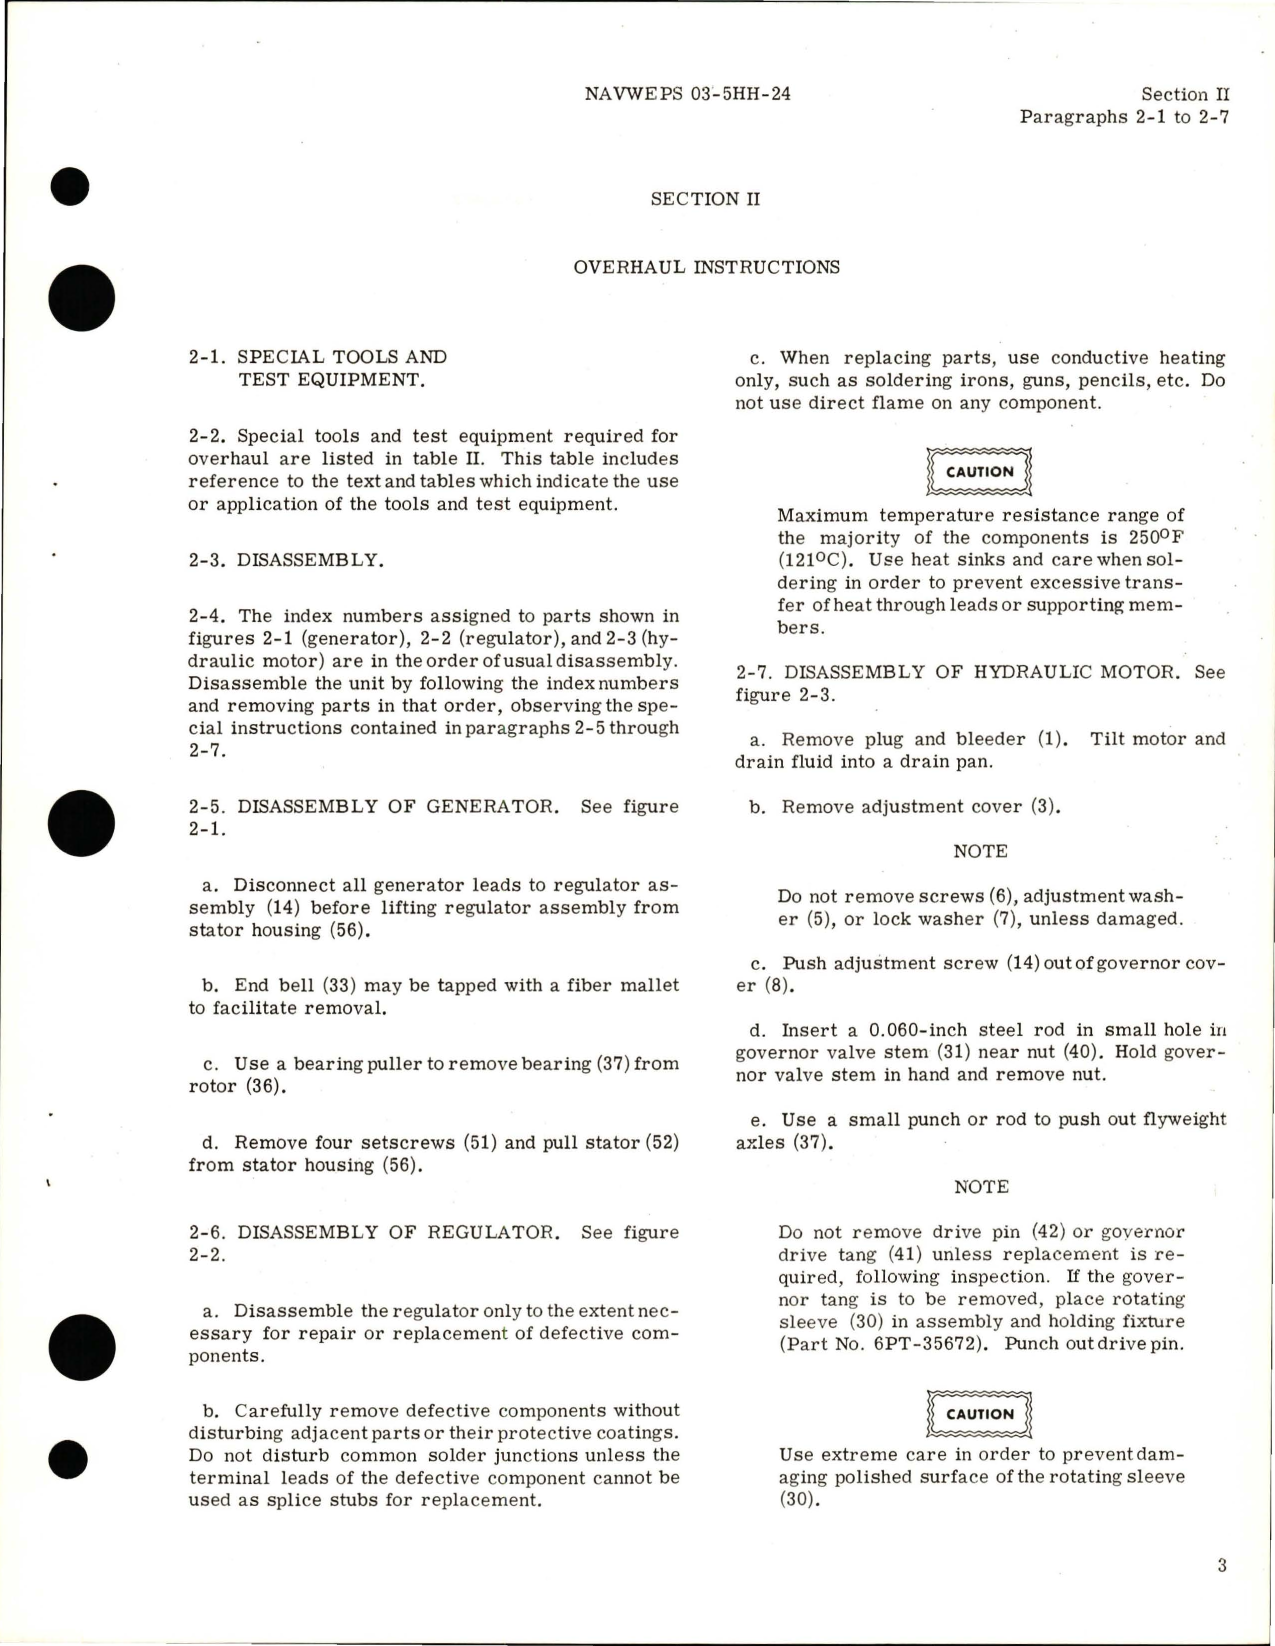 Sample page 5 from AirCorps Library document: Overhaul Instructions for Motor-Generator - Part MGE 75-1 and Hydraulic Motor - Part 684386C